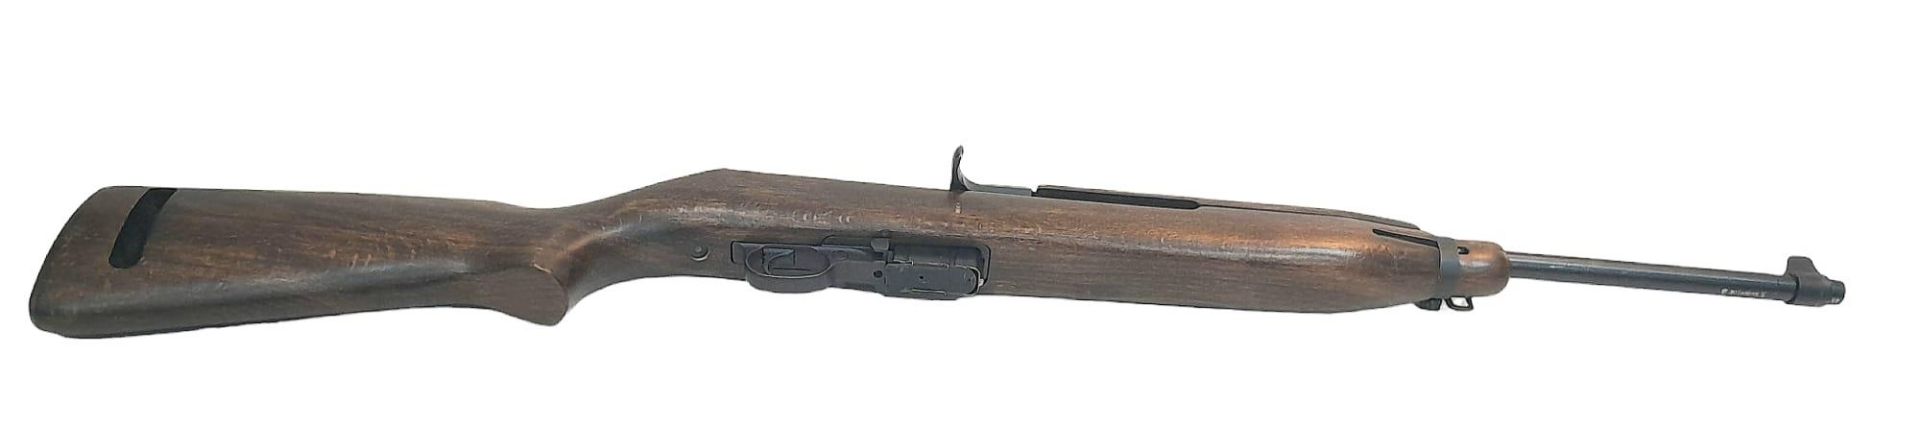 A Deactivated Winchester M1 Carbine Self Loading Rifle. Used by the USA in warfare from 1942-73 this - Image 5 of 12